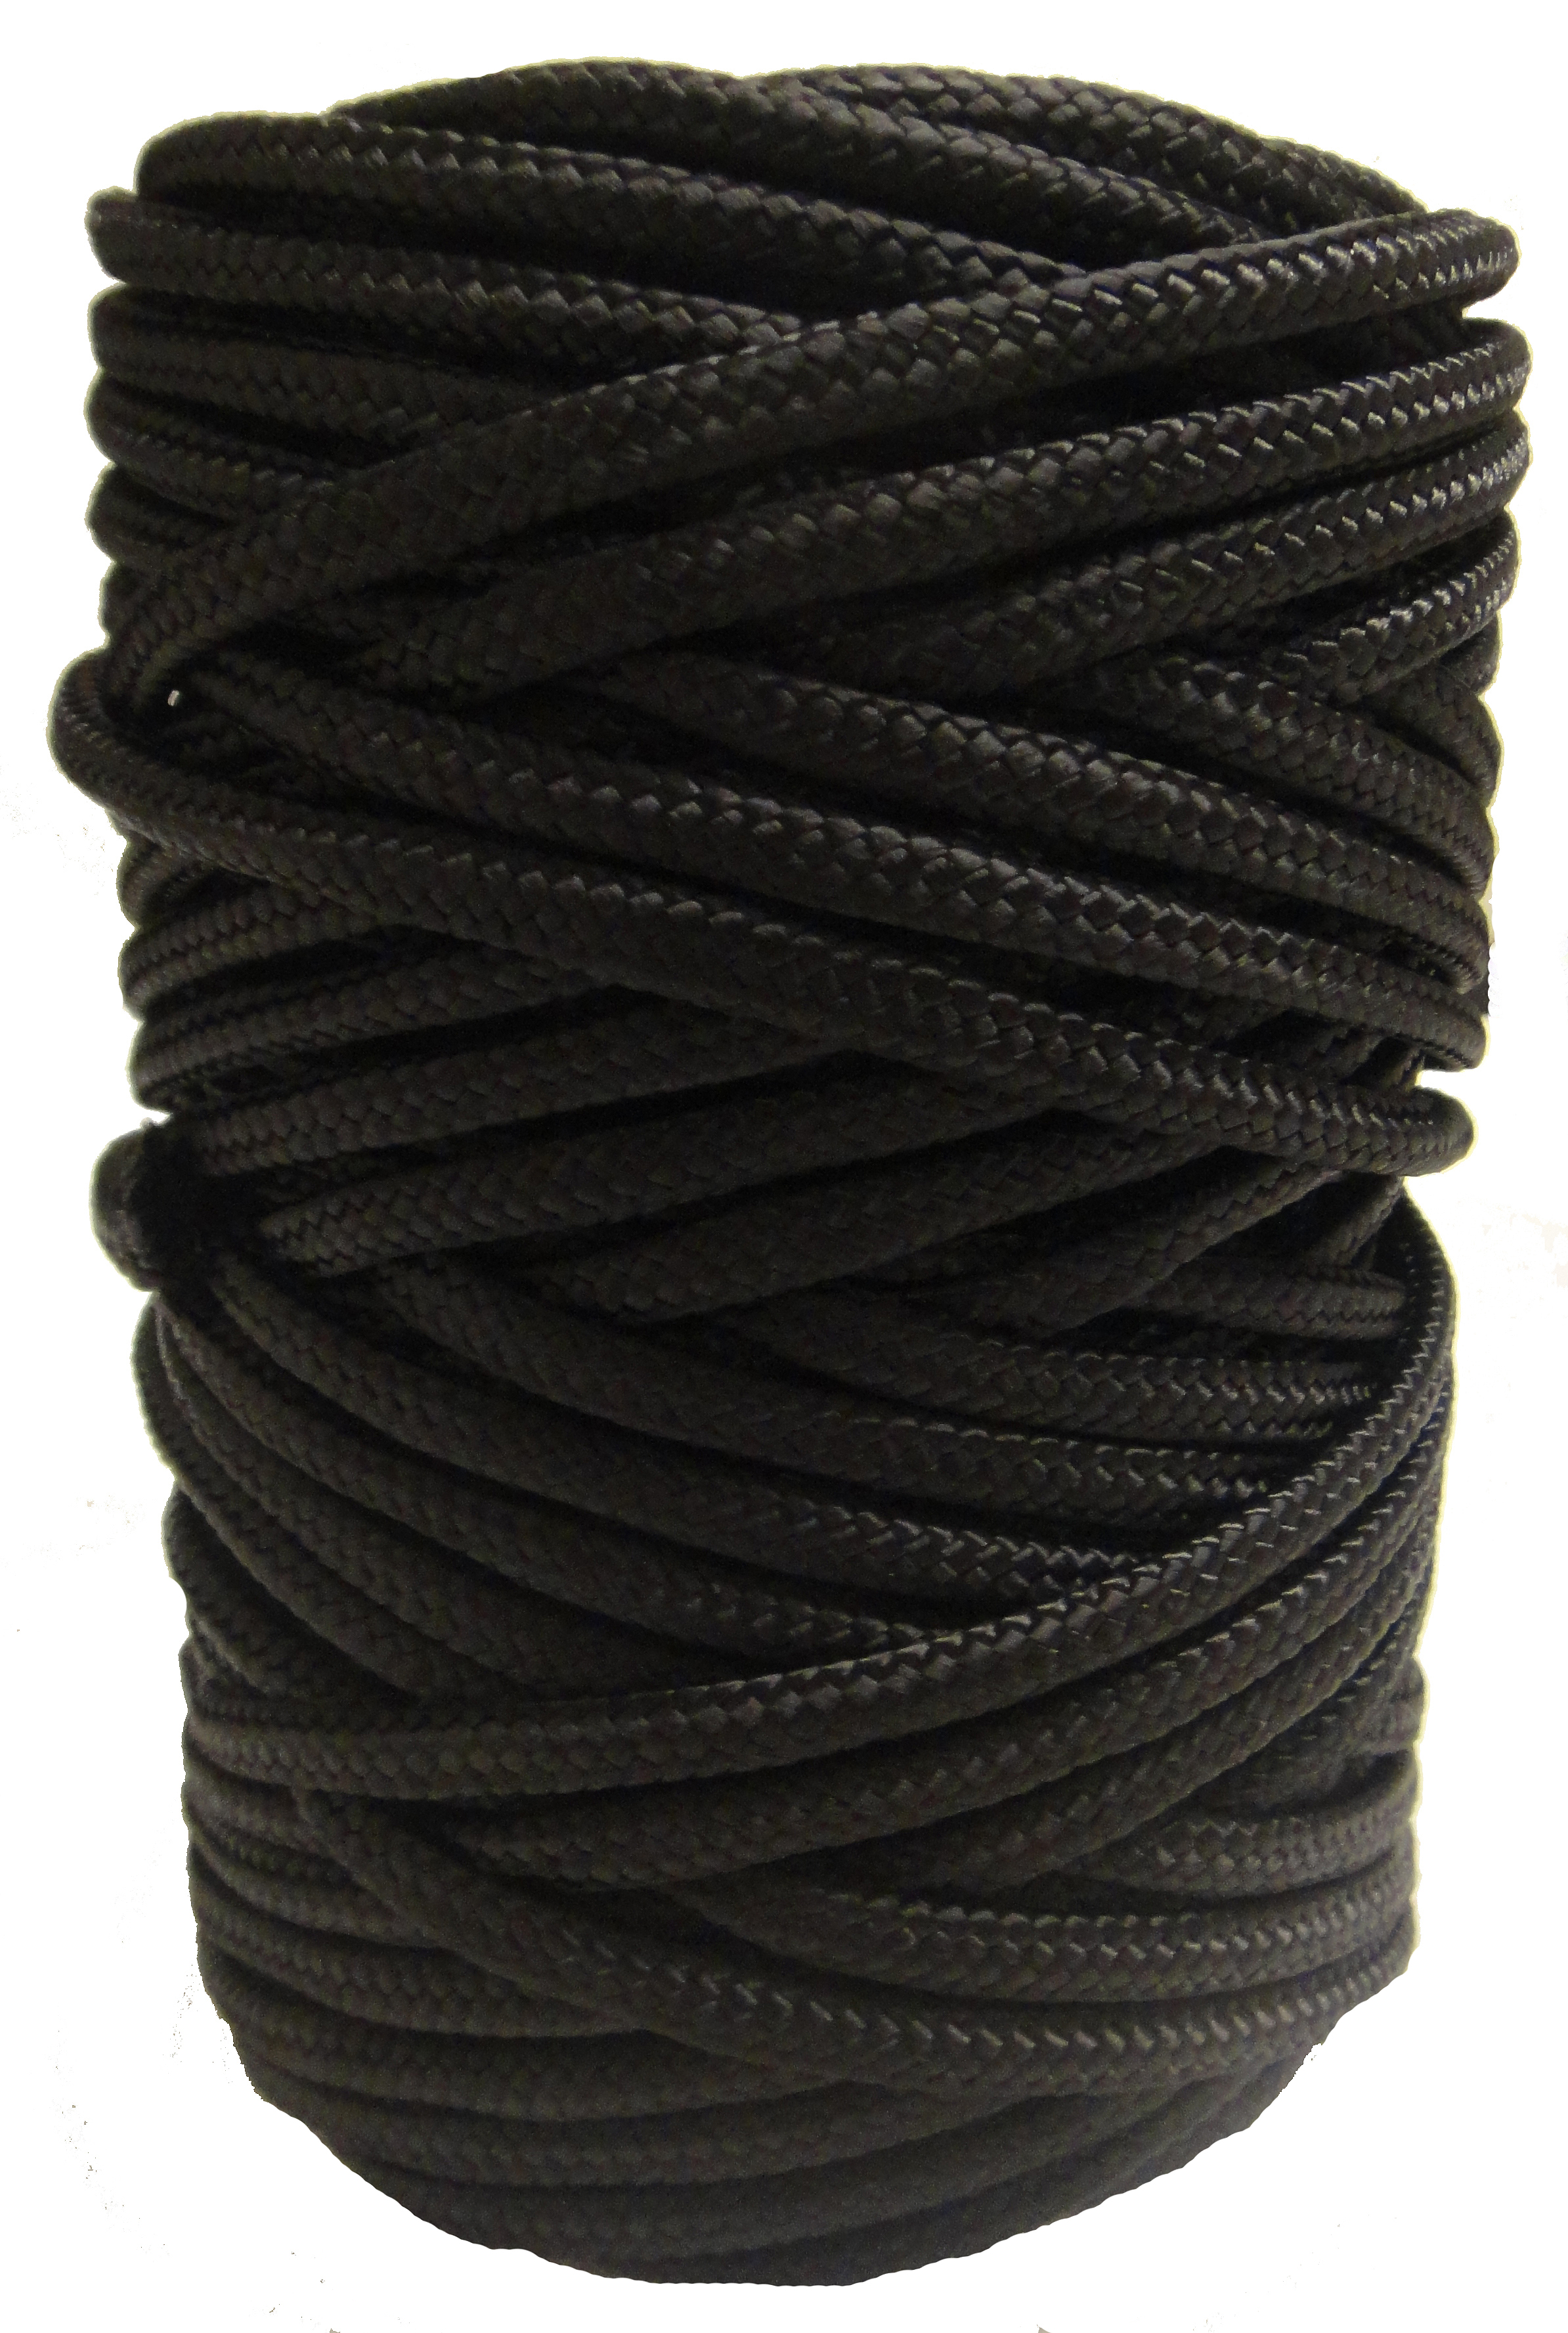 6mm Black Polypropylene Braided Poly Rope Cord Metres Strong String 